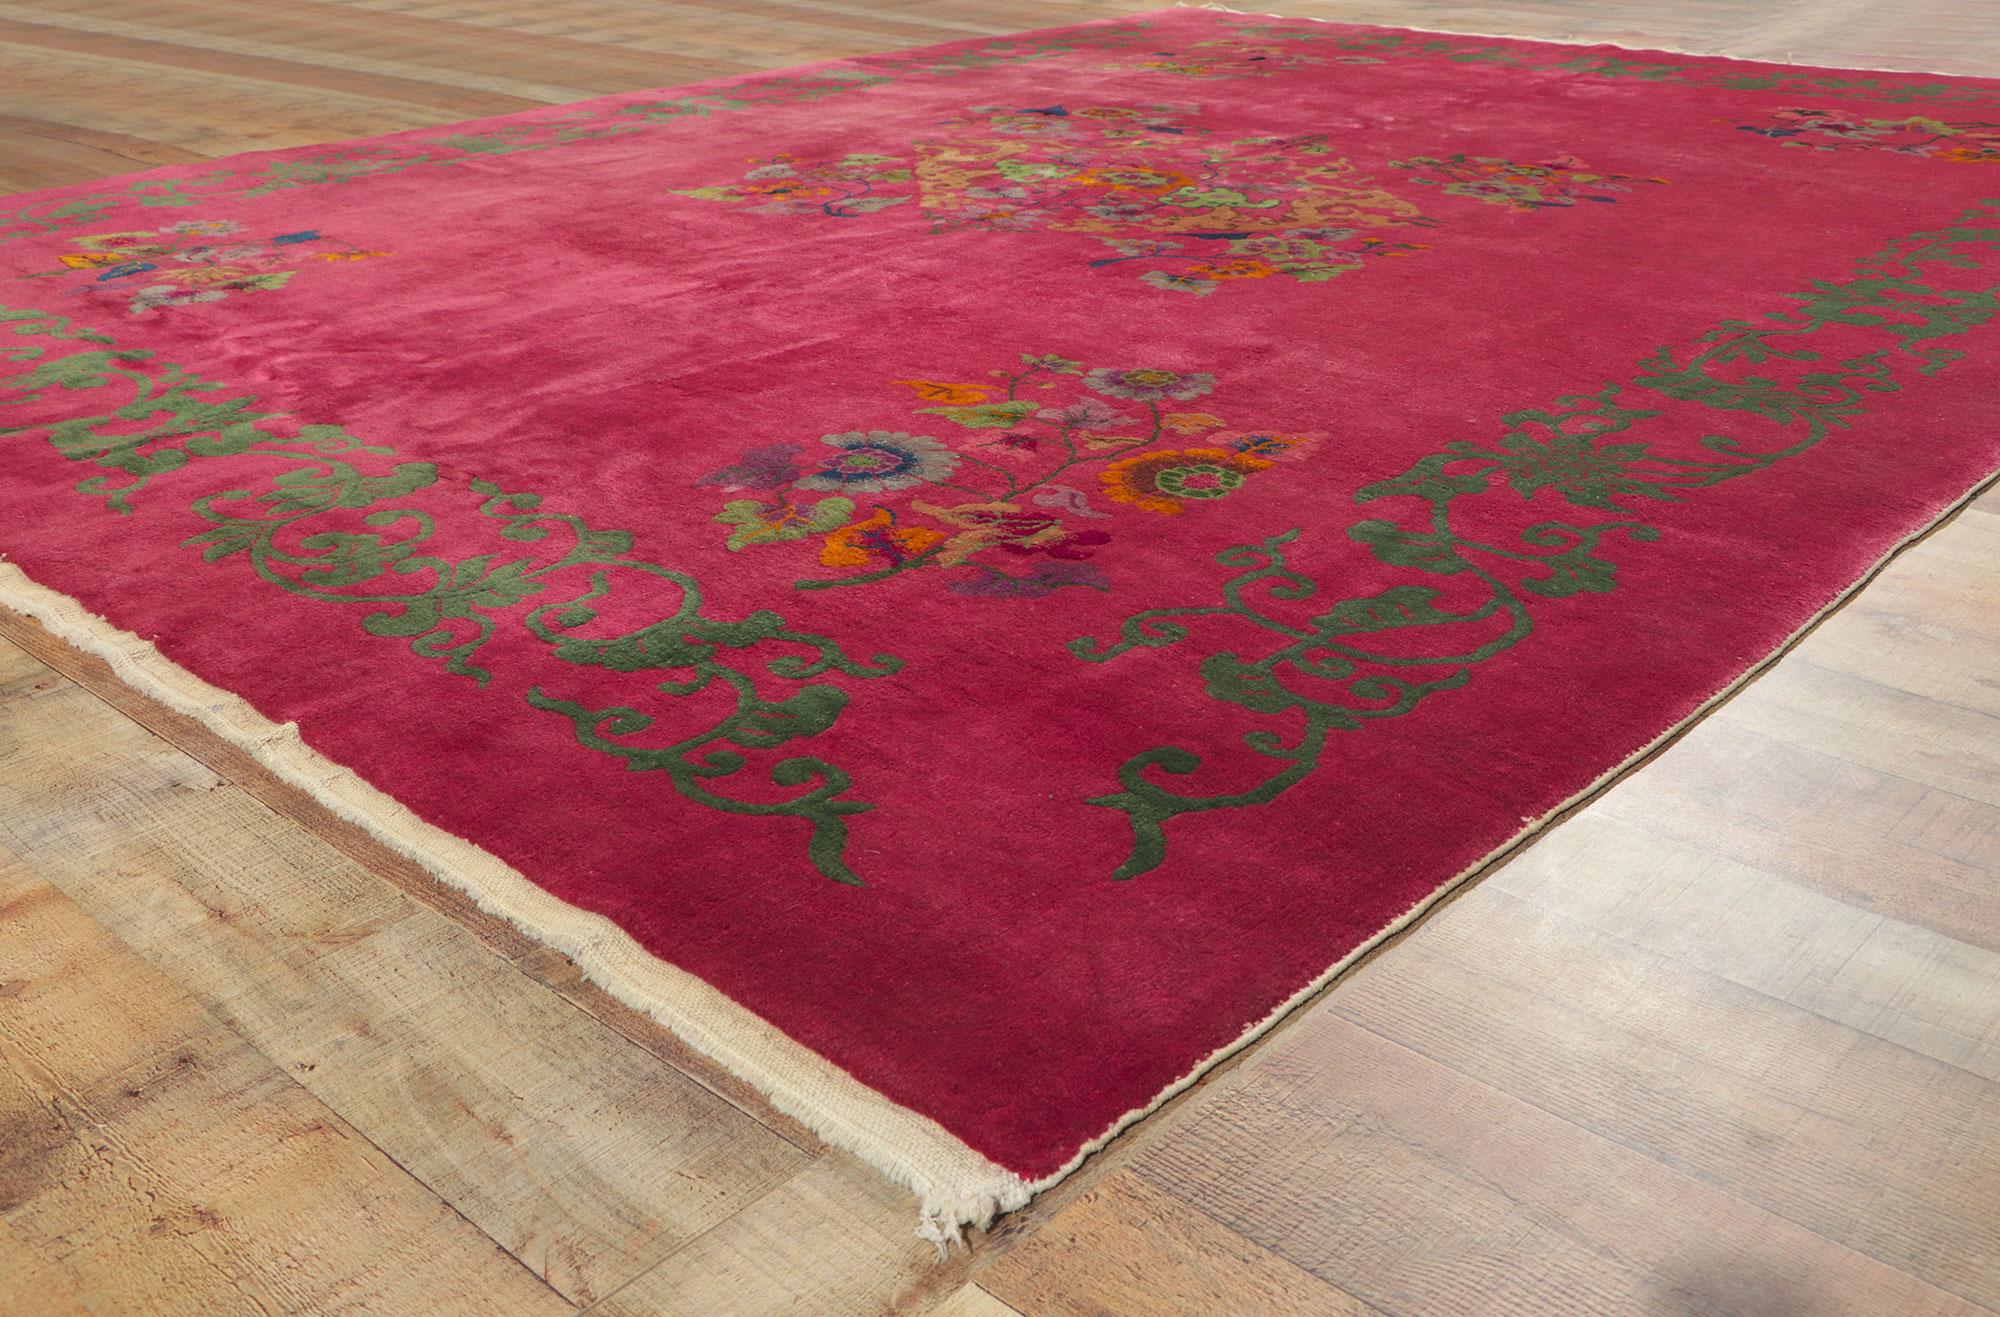 Antique Chinese Art Deco Rug, Sensual Decadence Meets Maximalist Style For Sale 1